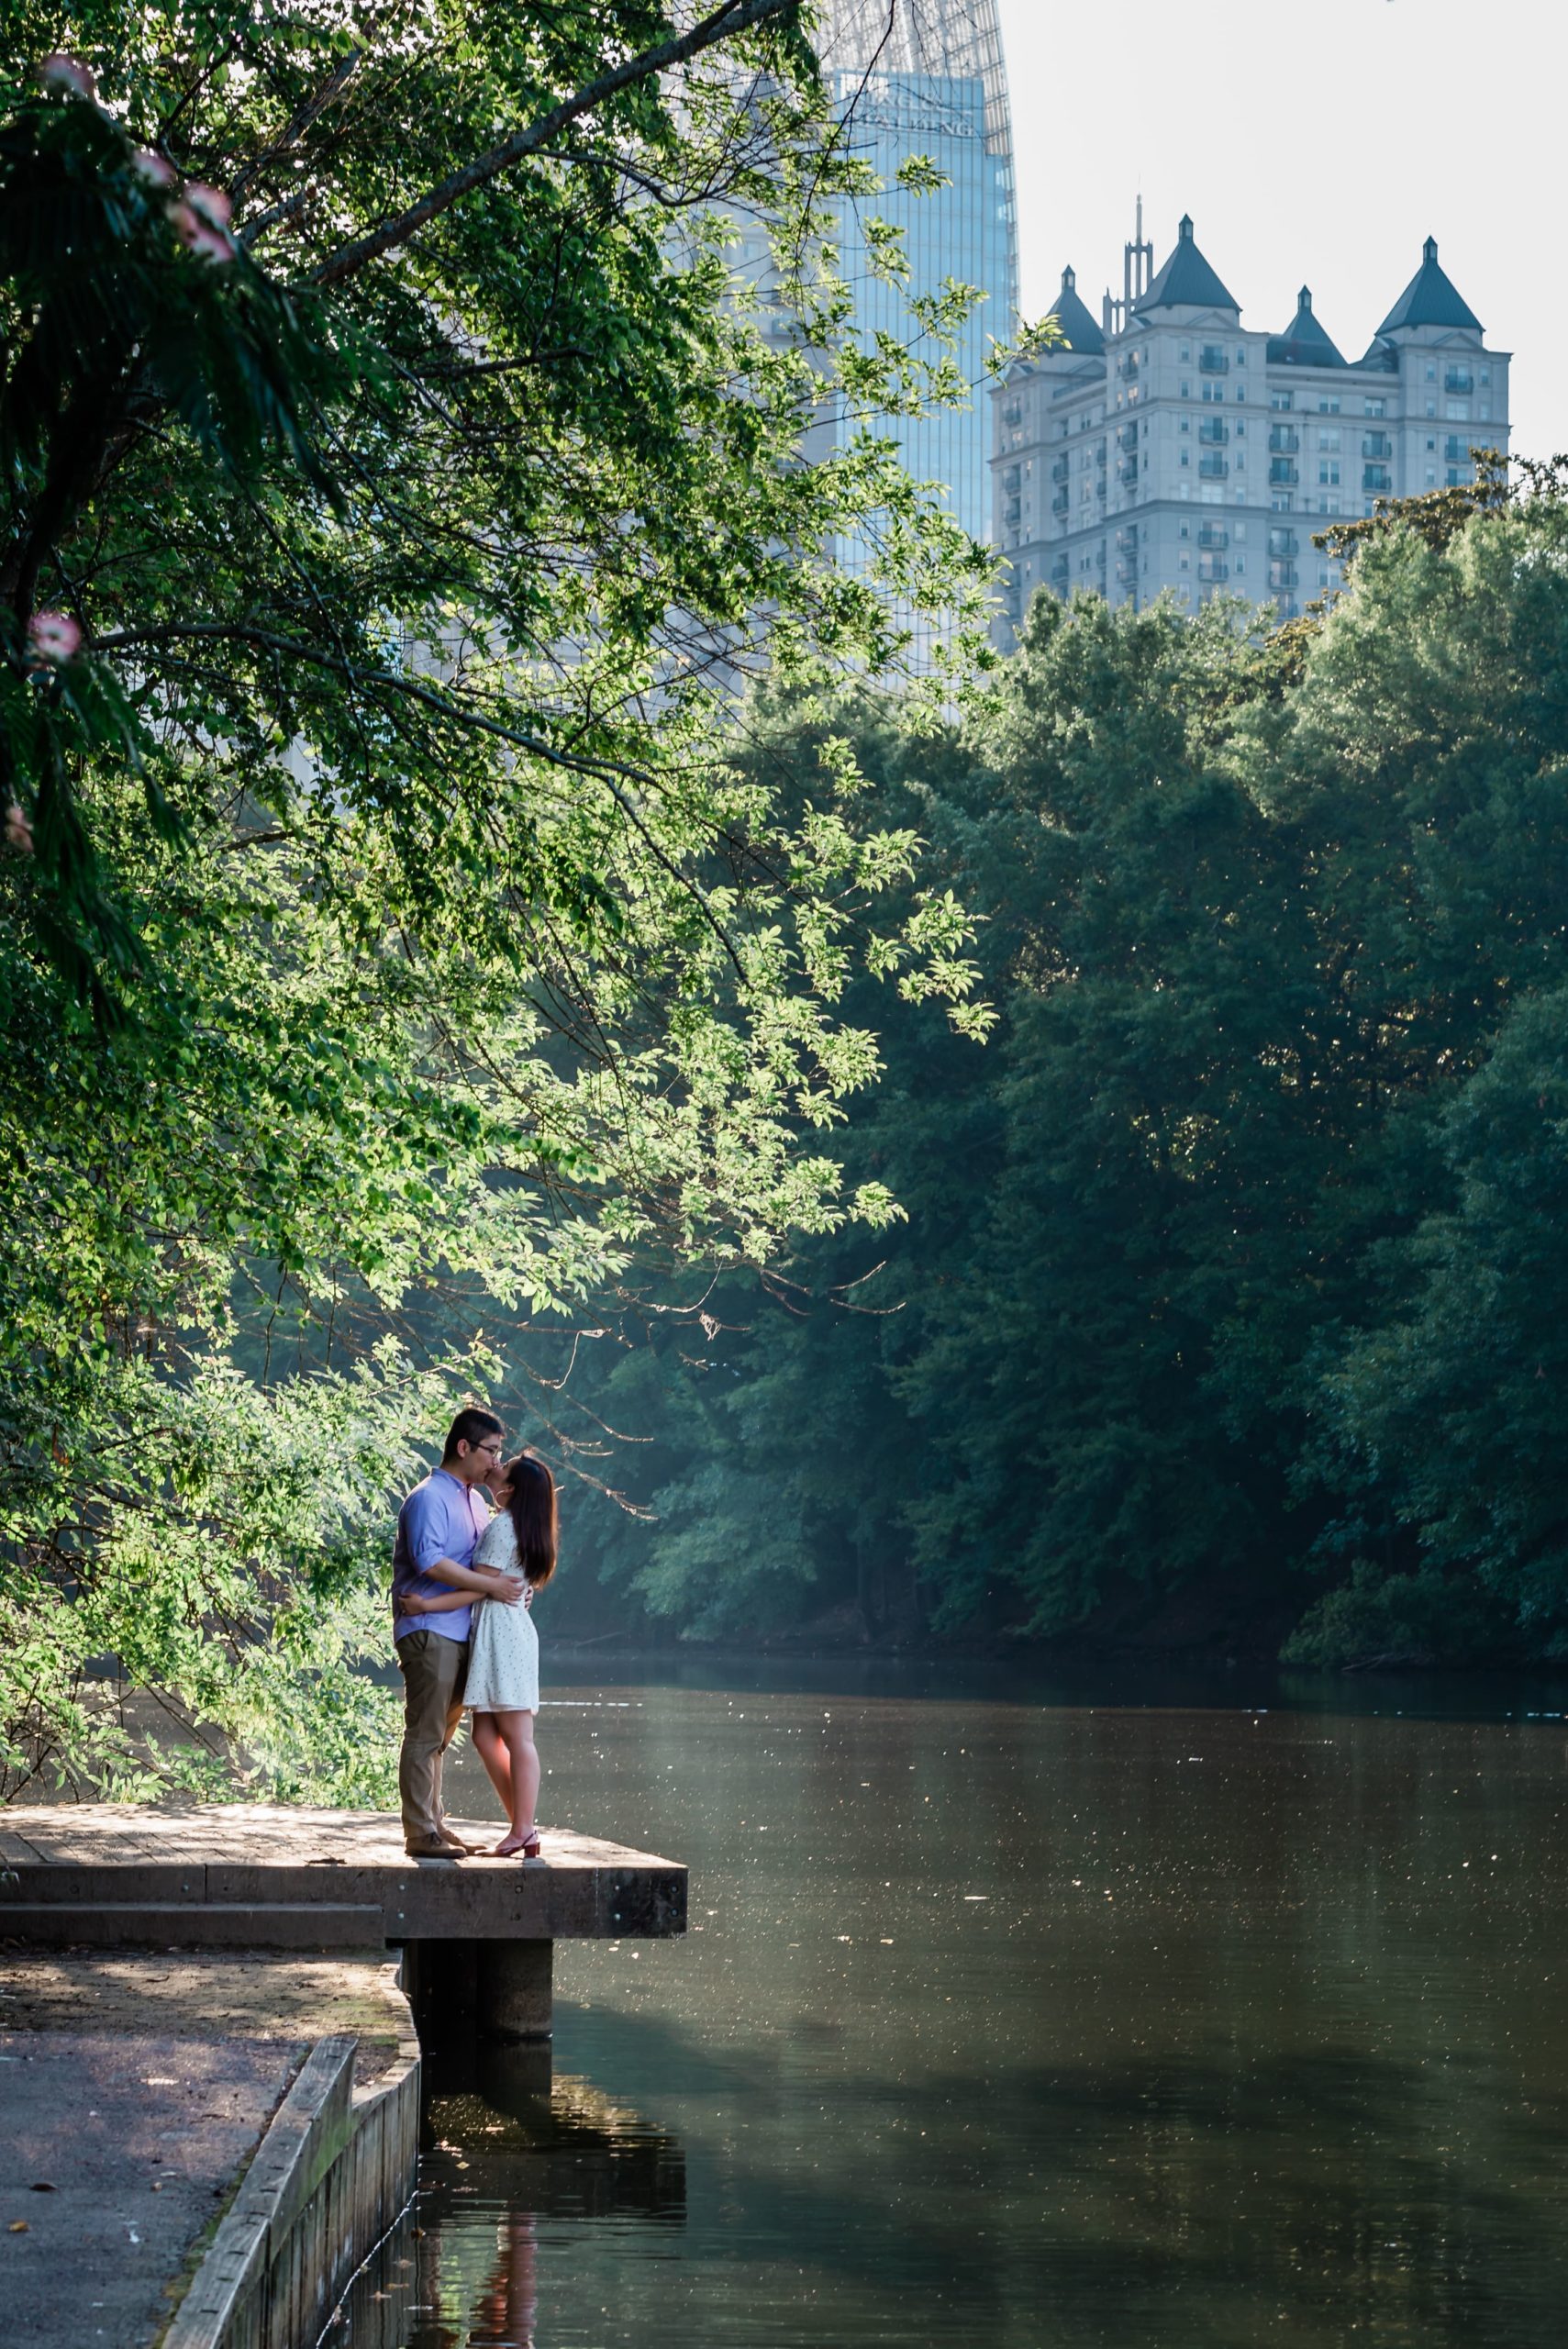 Taken in Piedmont Park, this portrait is by the water with the Atlants skyline in the back. A couple kisses on the dock.